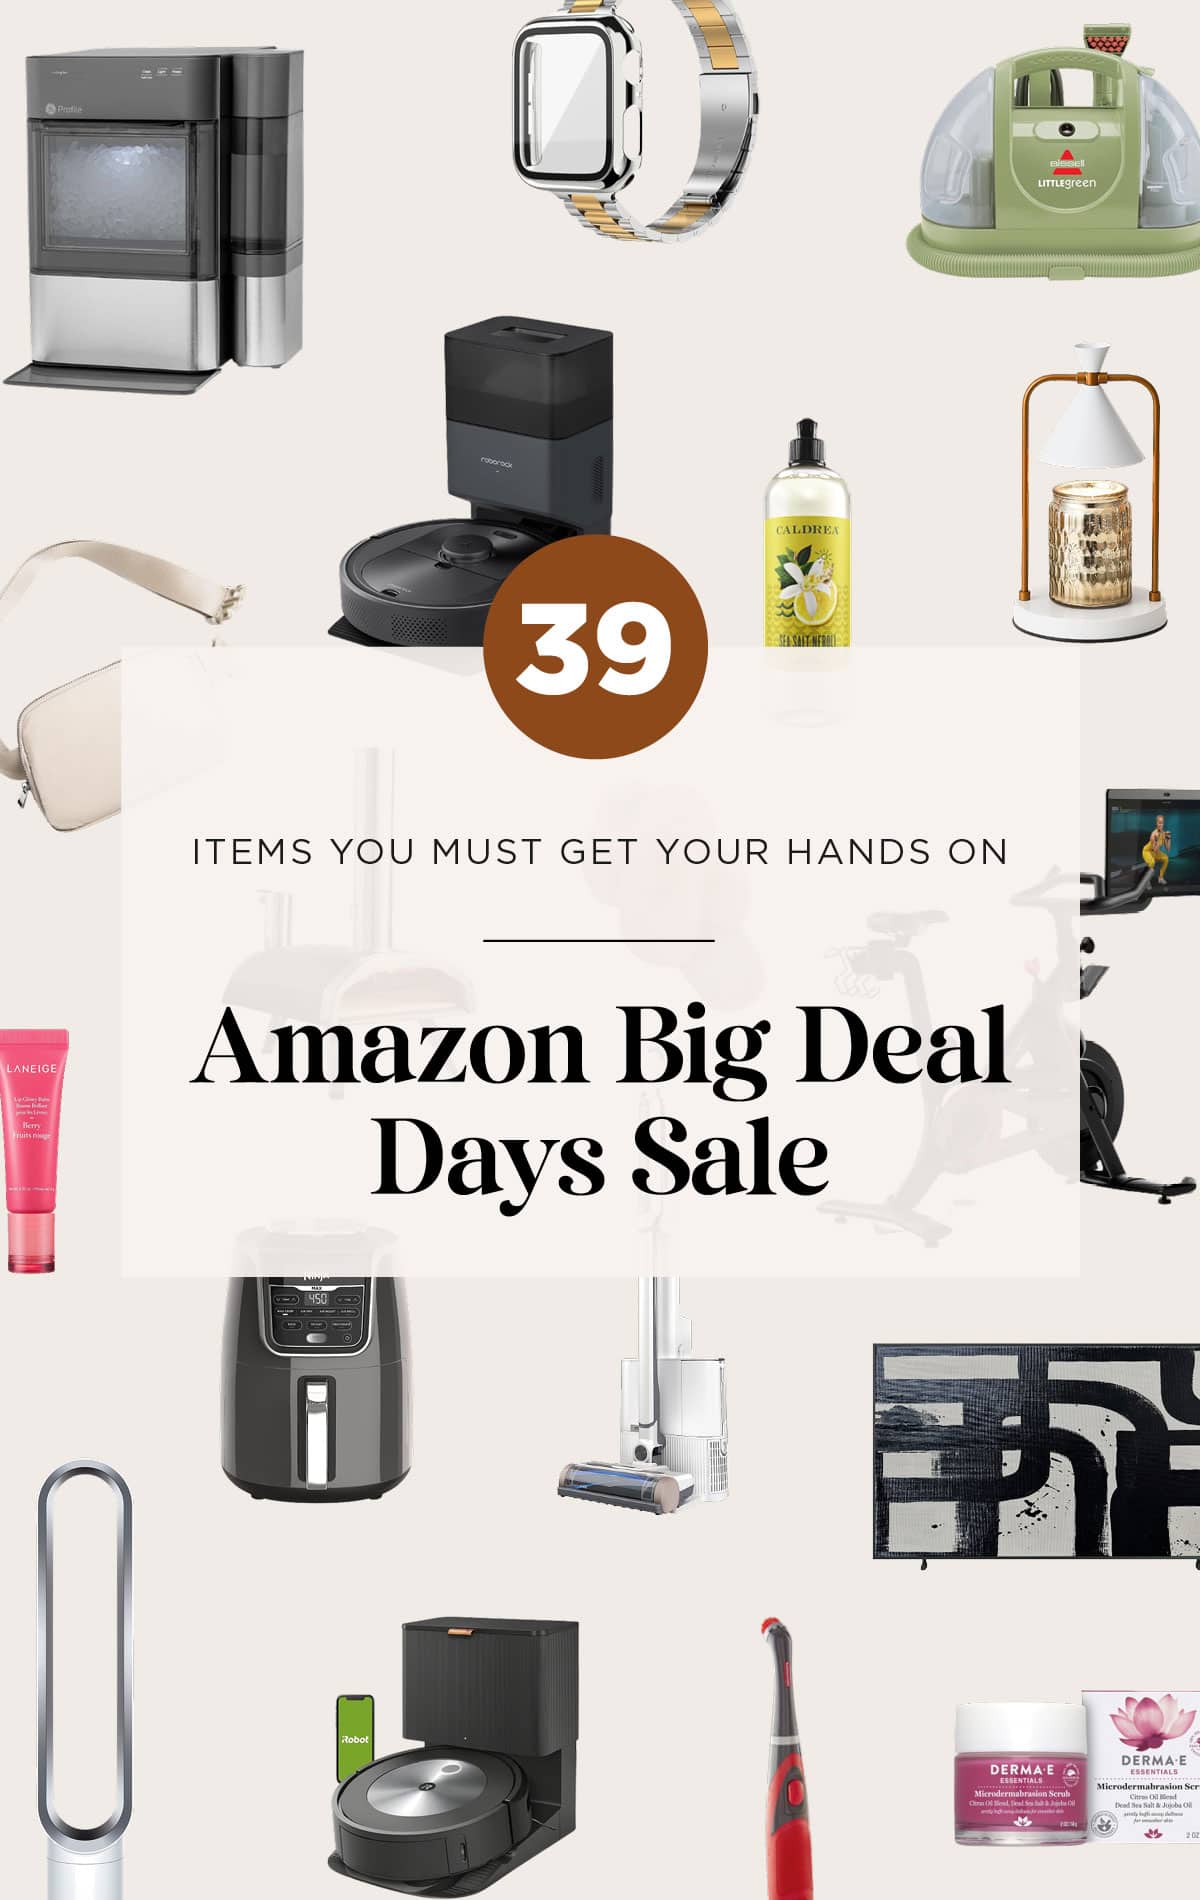 When Is  Prime Big Deal Days 2023? Here's Everything to Know